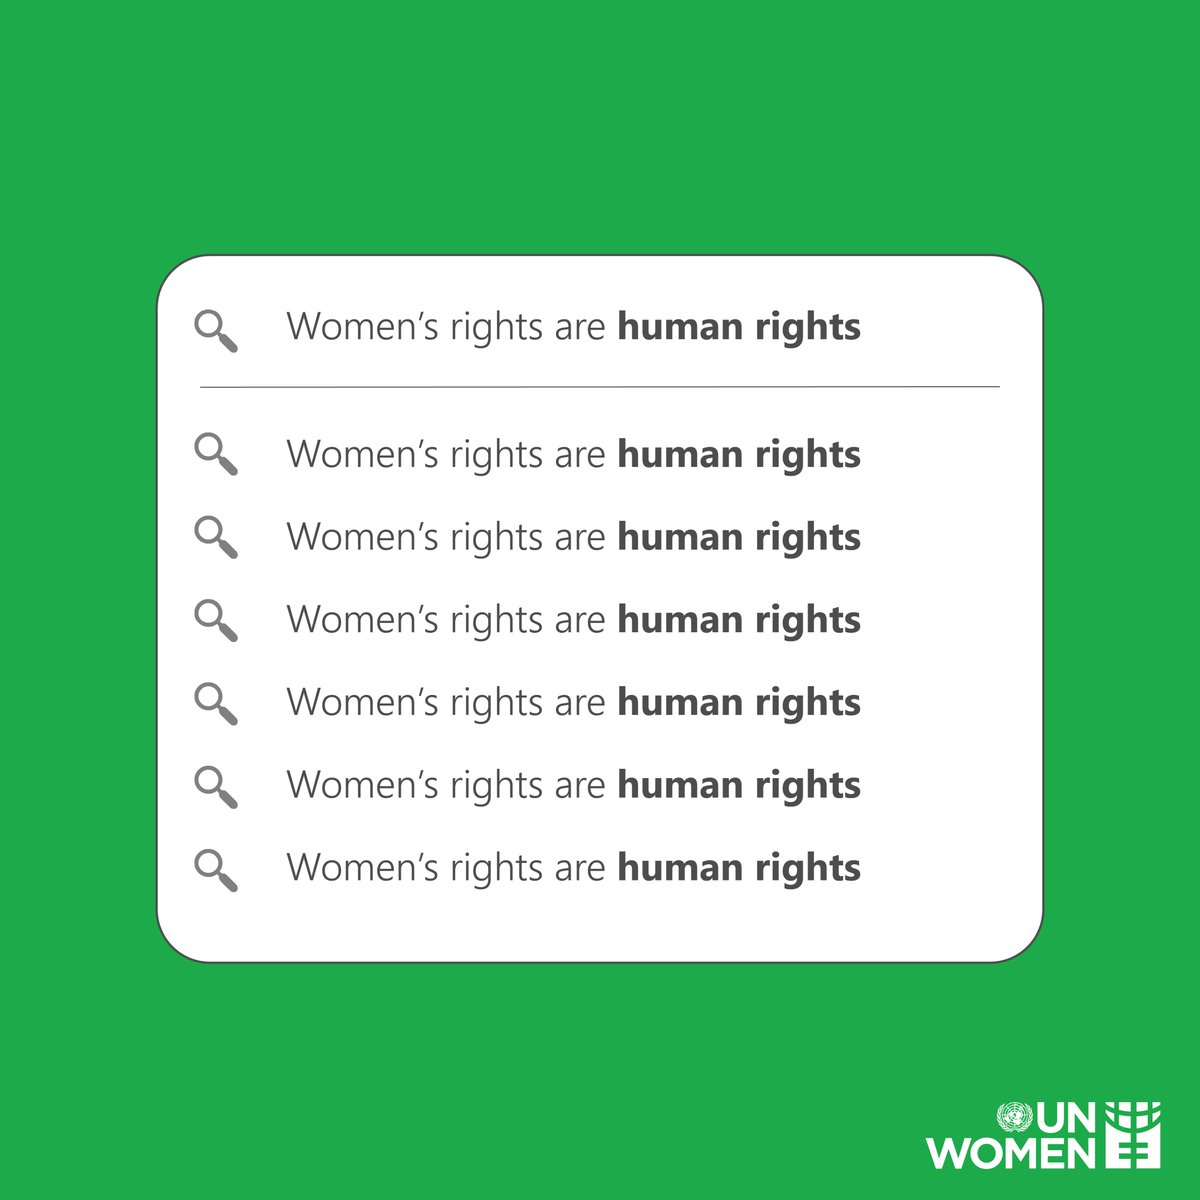 Here's a fact you don't need to search further for: Women's rights are human rights. RT if you agree!